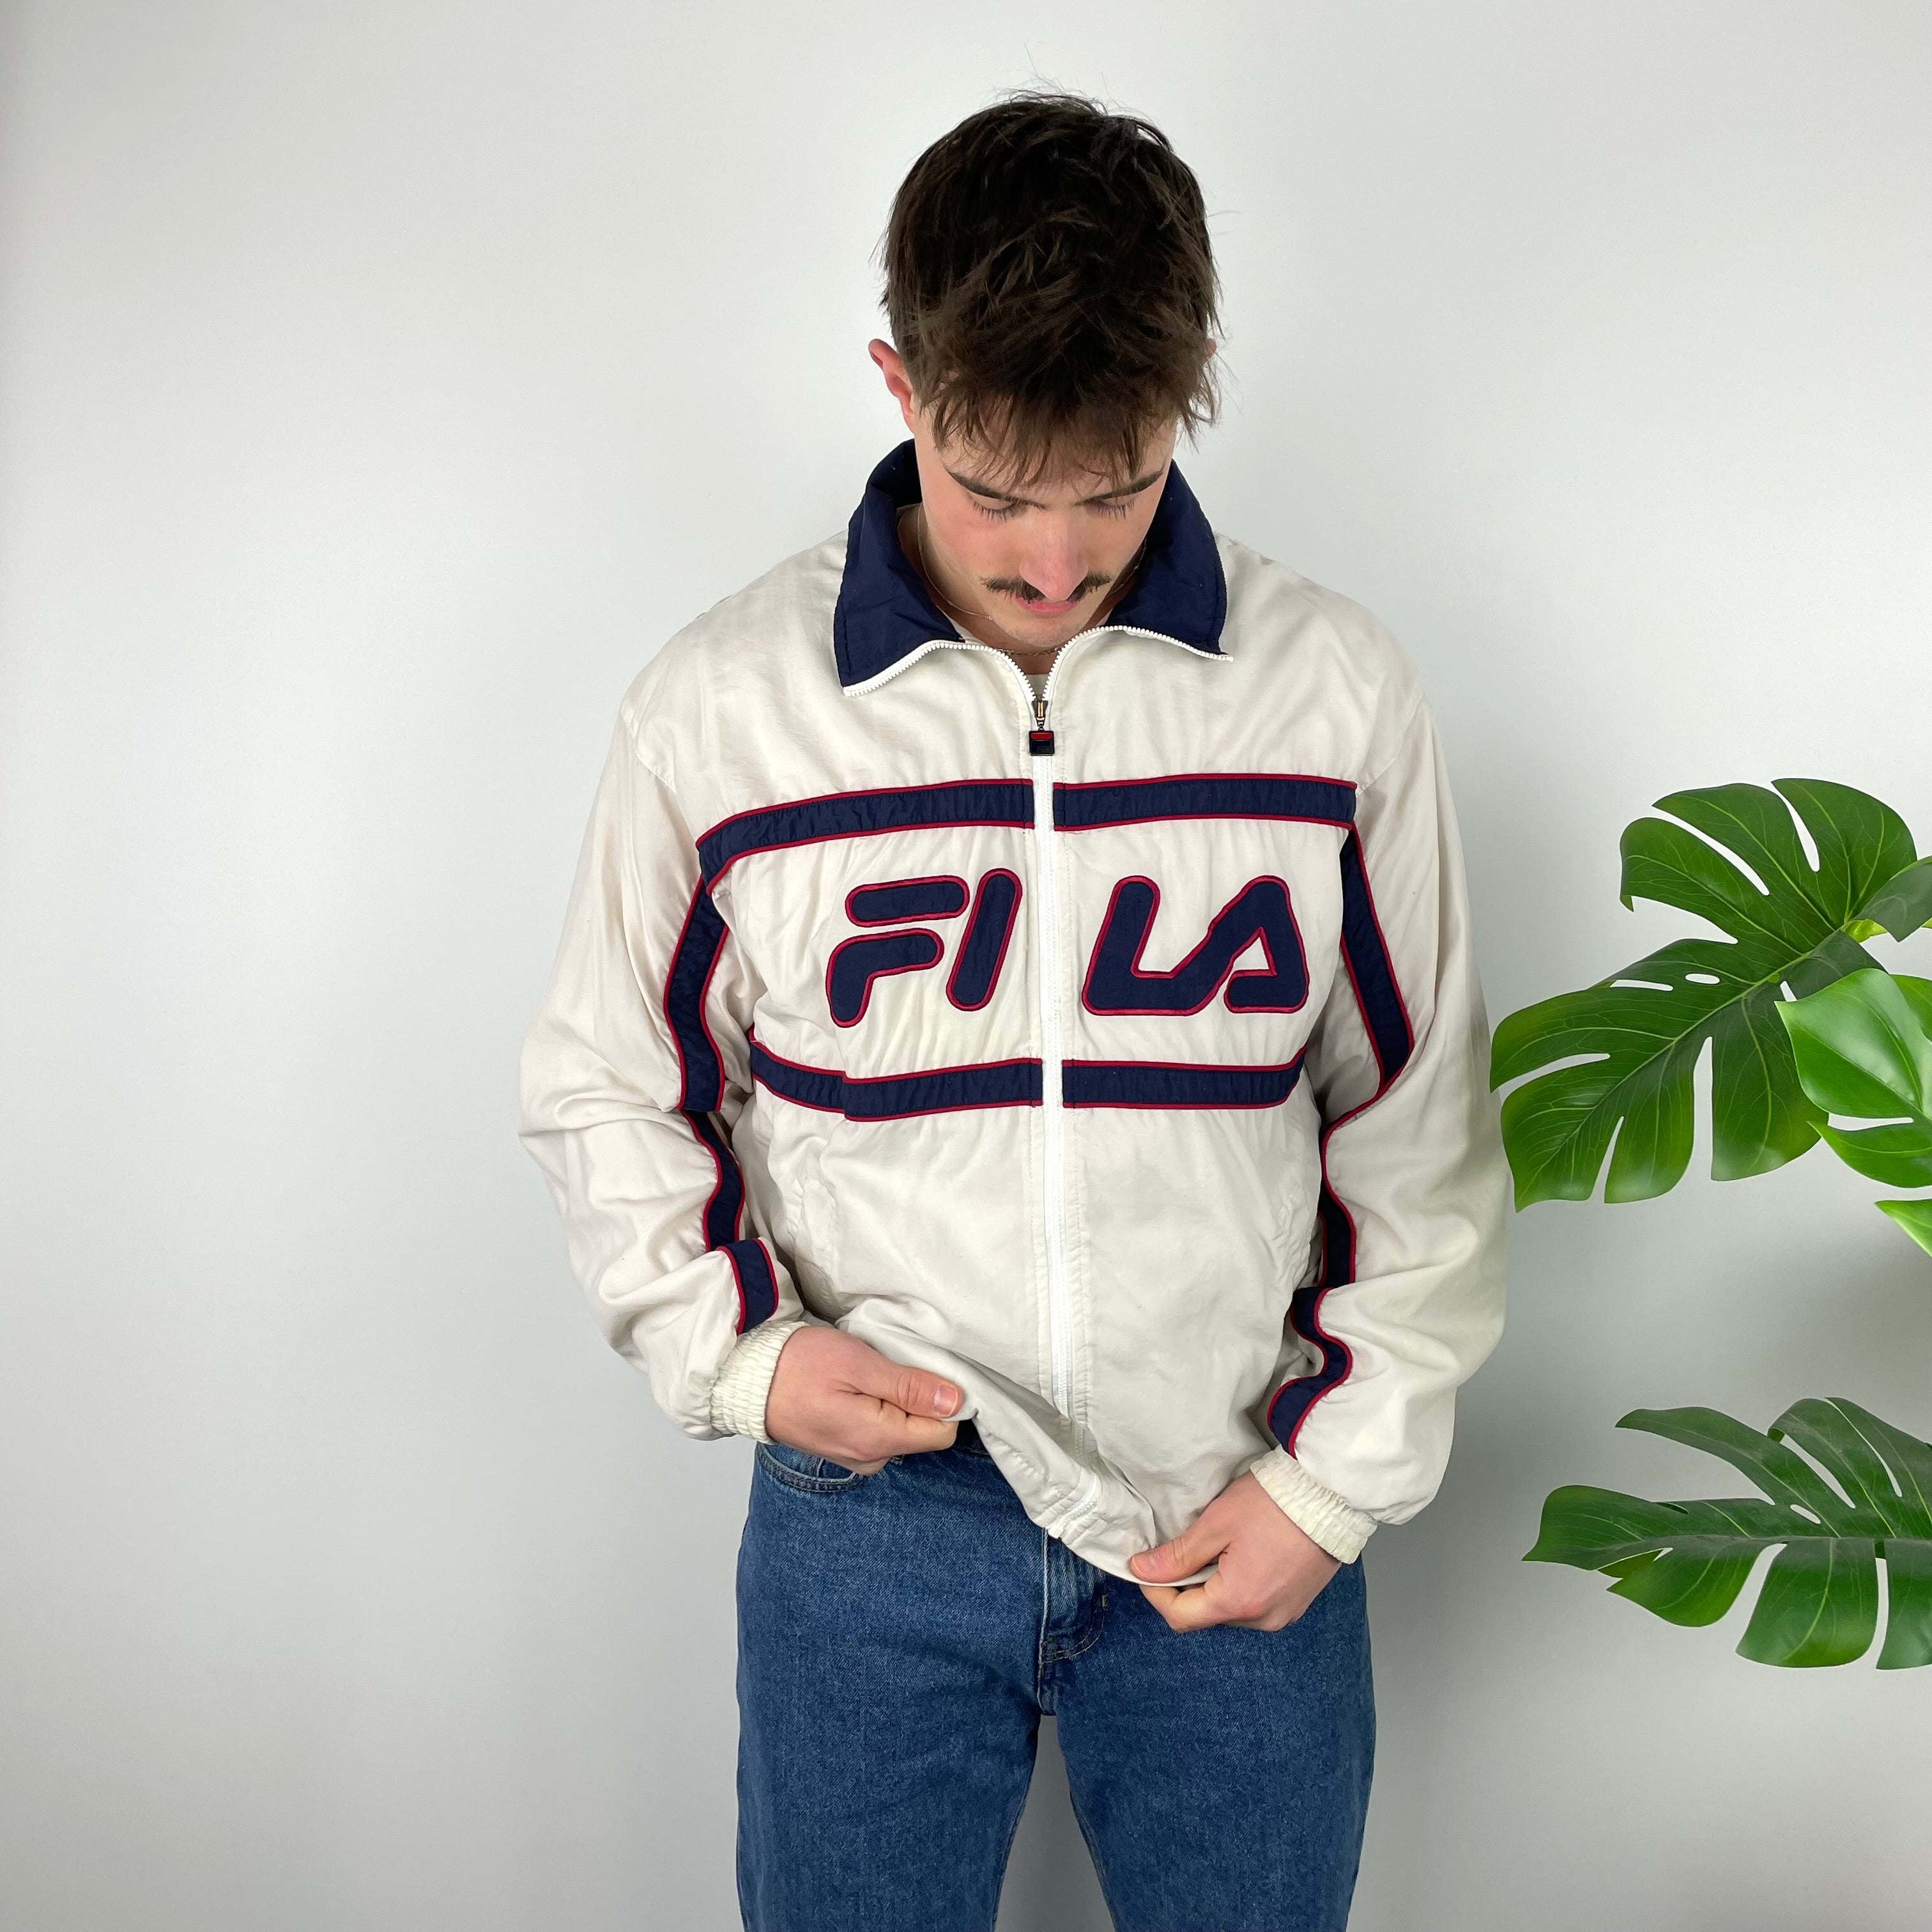 FILA RARE Cream Embroidered Spell Out Windbreaker Jacket (M)